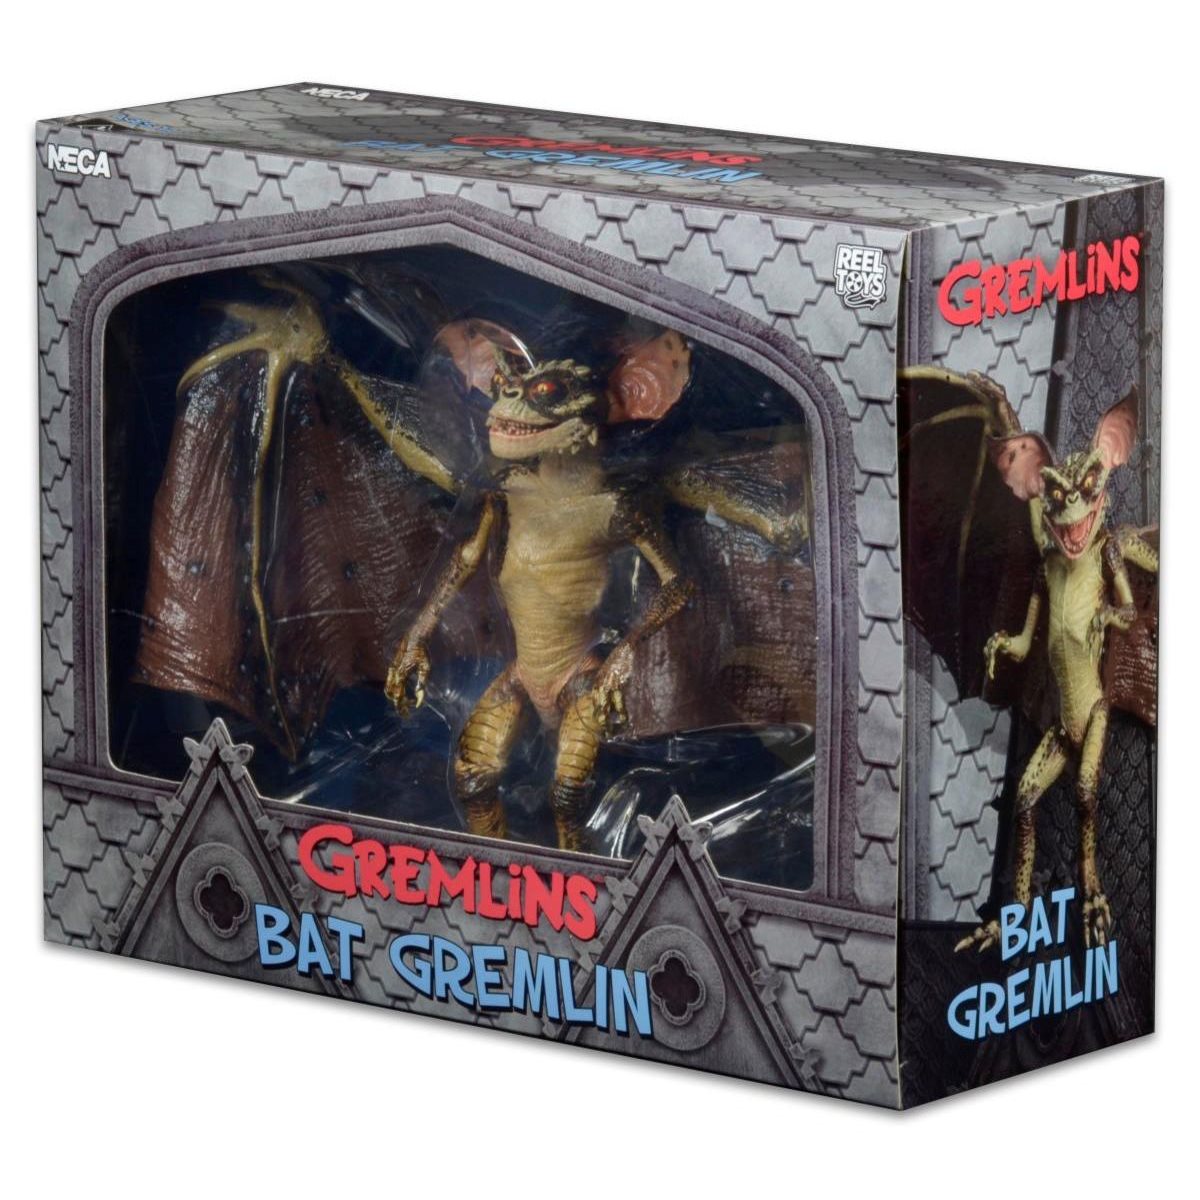 Gremlins 2 The New Batch BAT GREMLIN Deluxe Boxed action figure